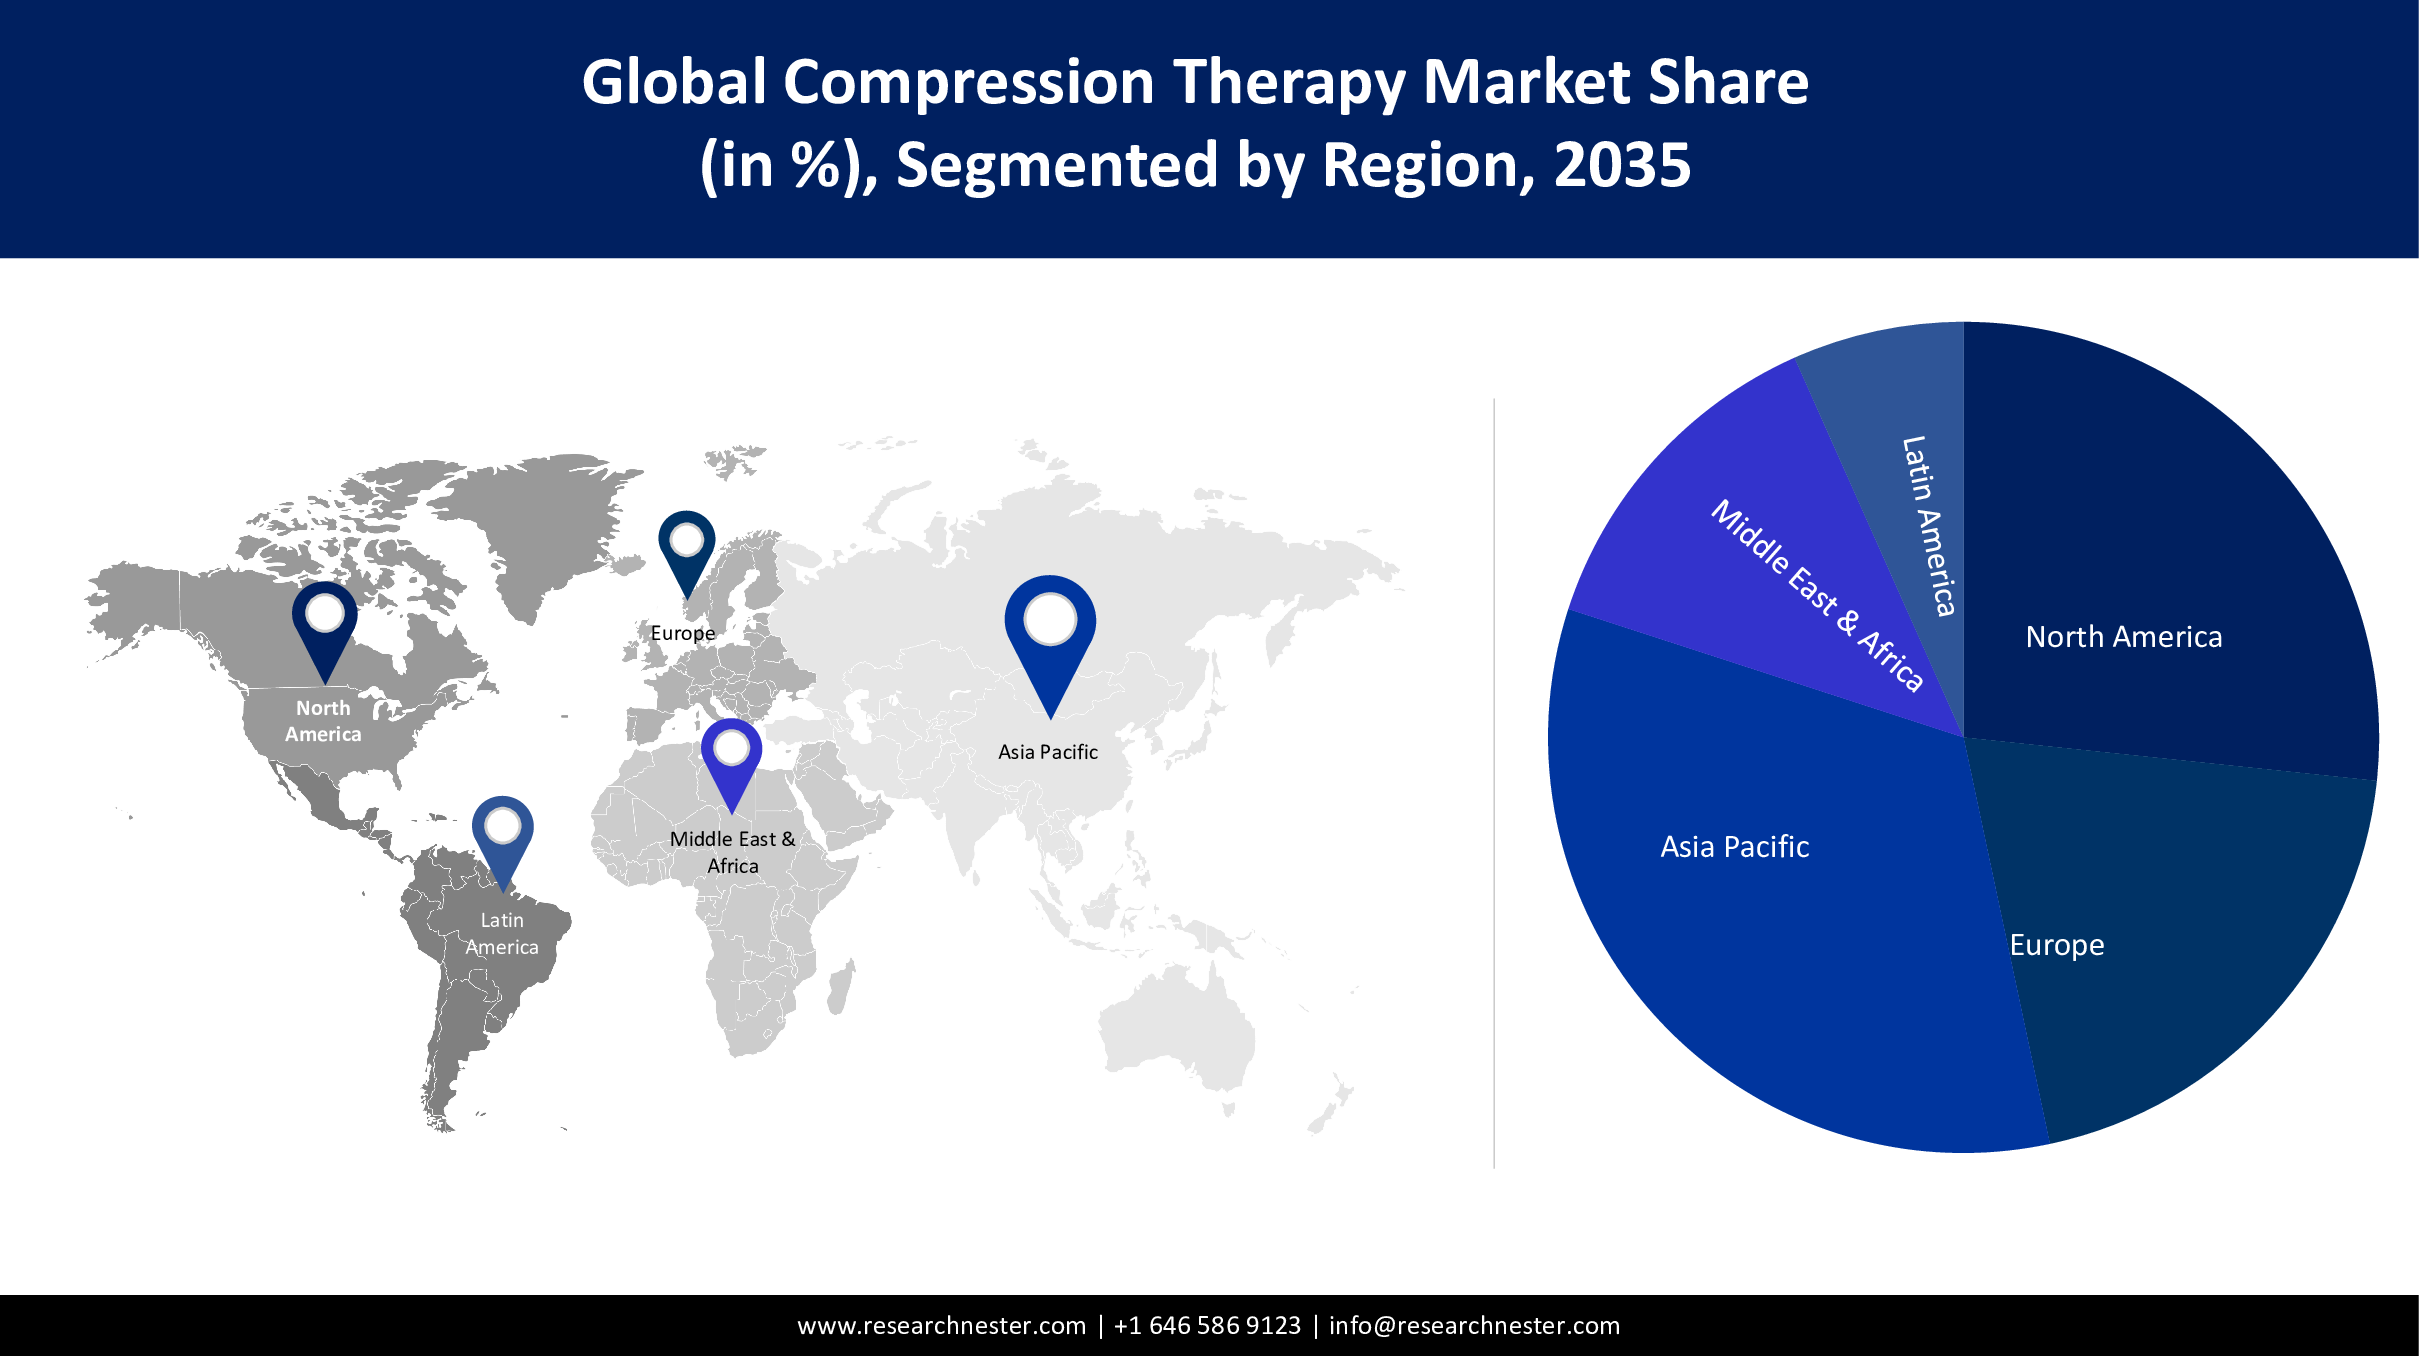 Compression Therapy Market Size